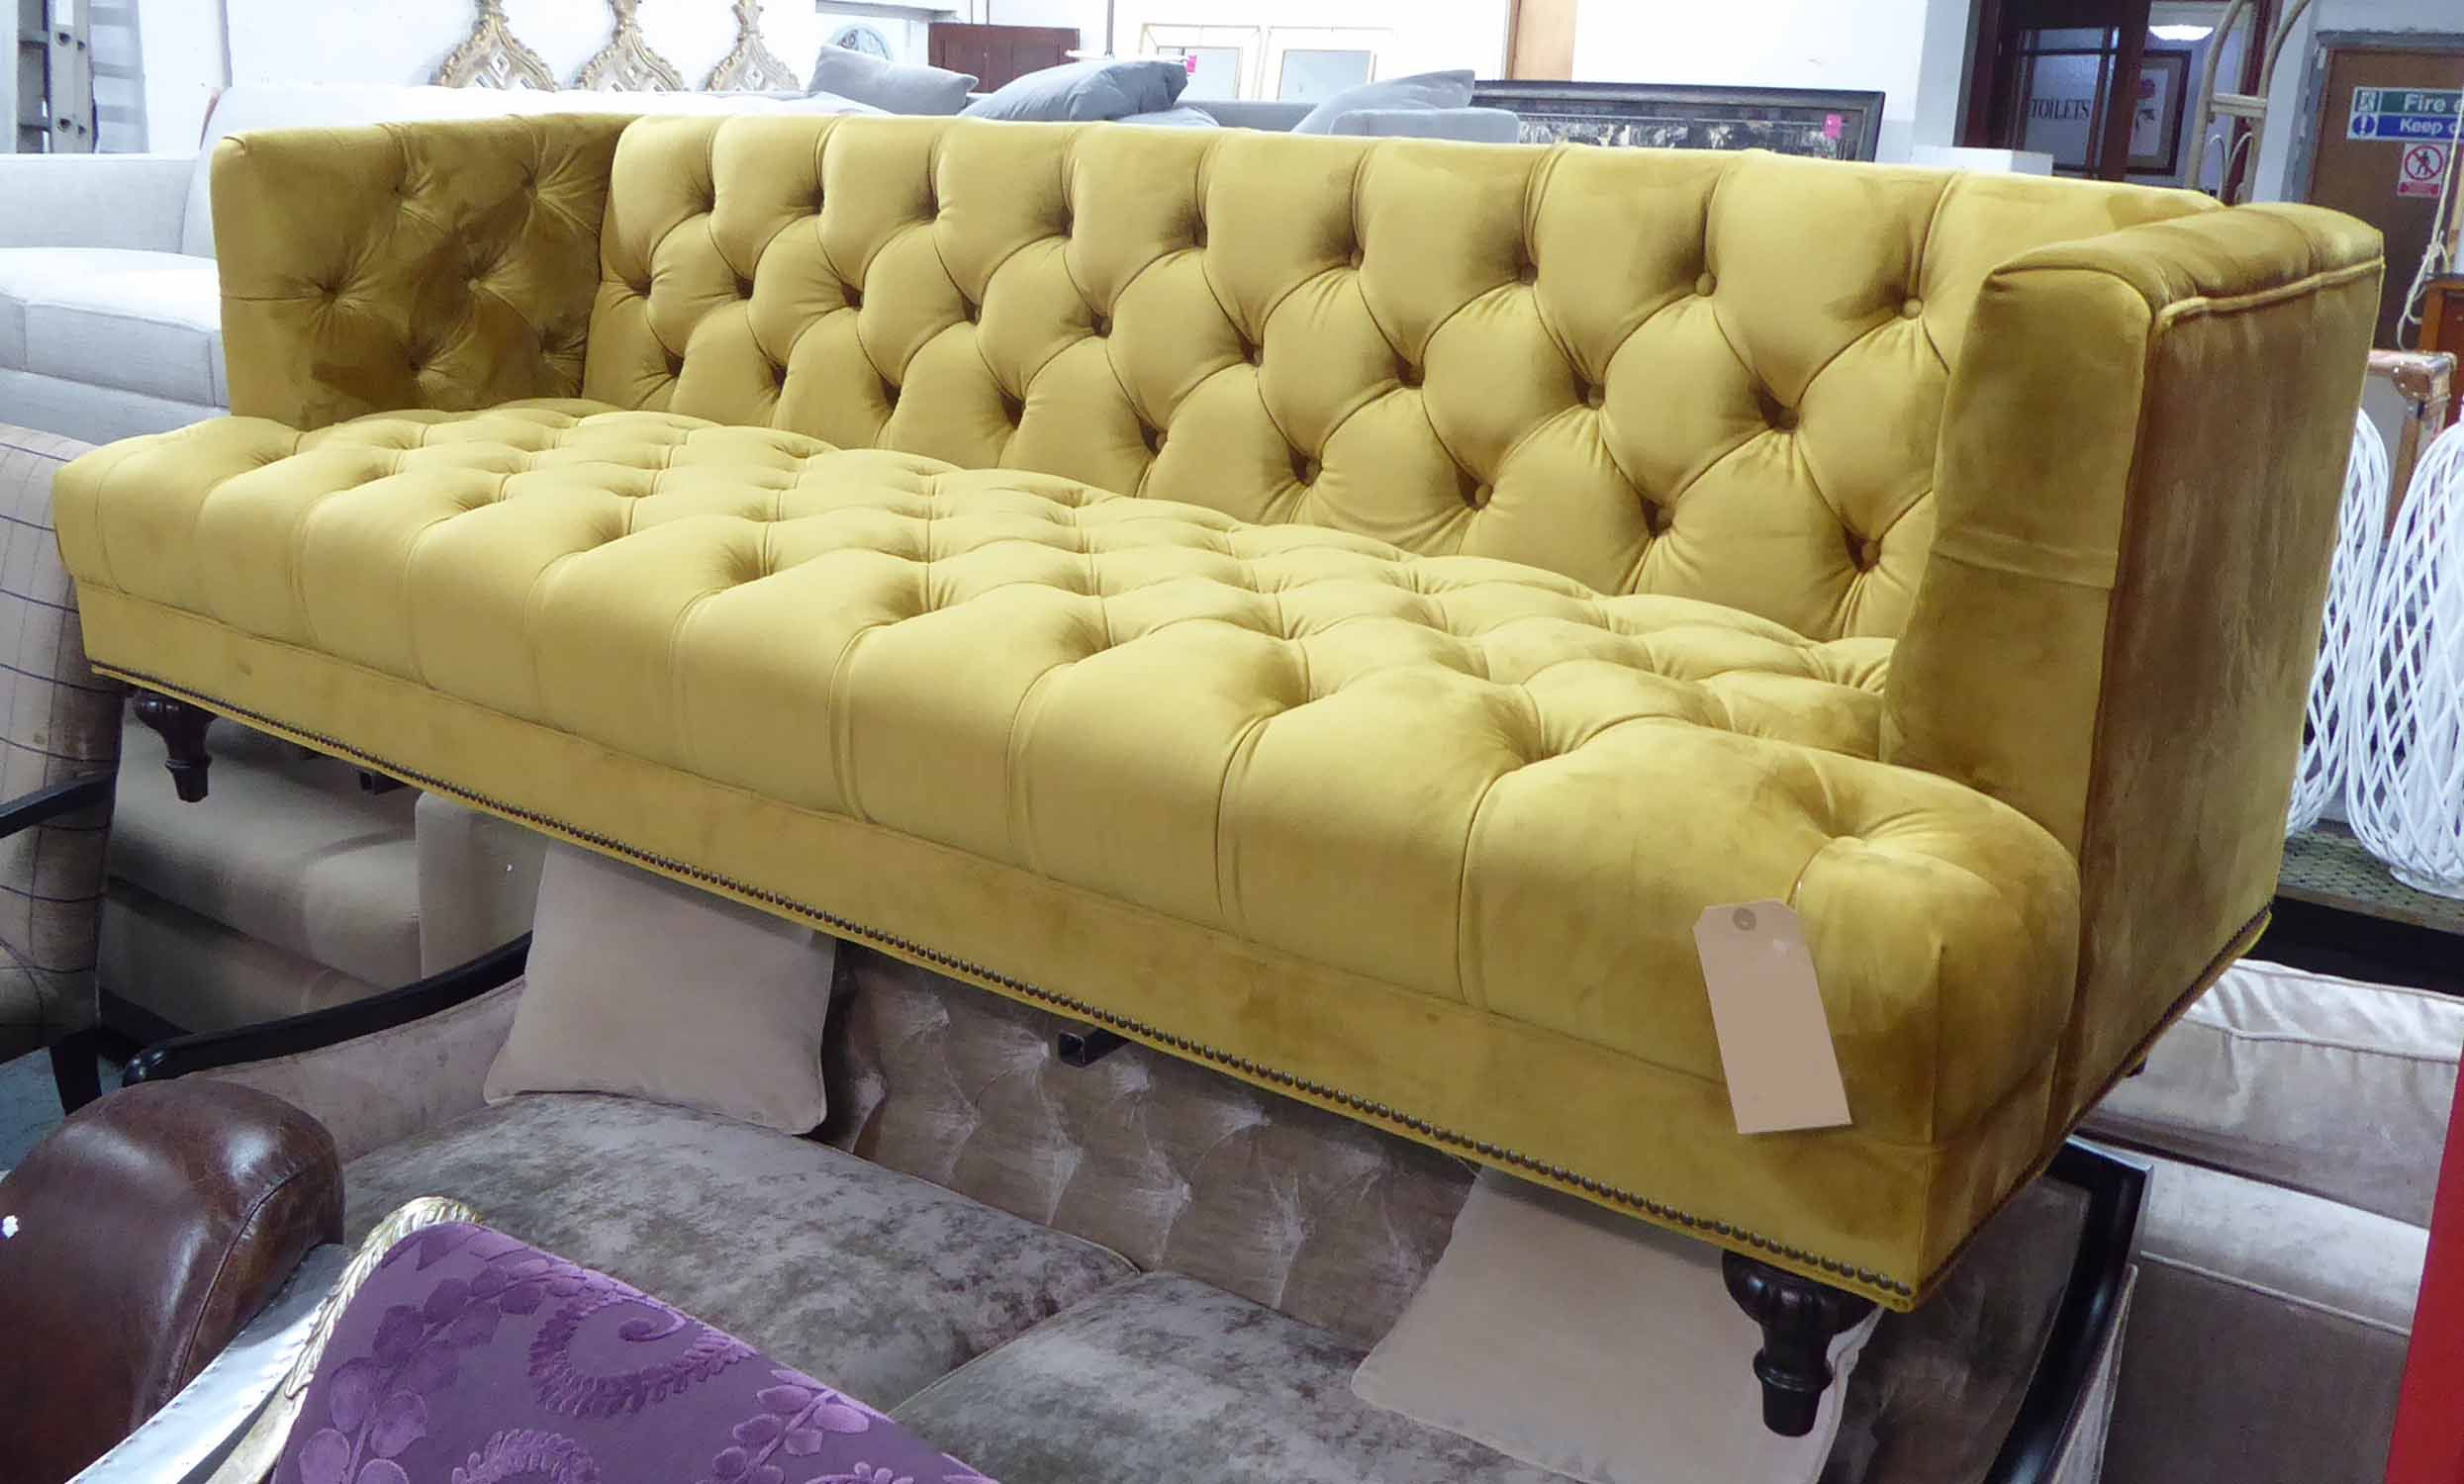 Artsome For Coach House Sofa, Mustard Buttoned Finish Inside French Seamed Sectional Sofas Oblong Mustard (View 4 of 15)